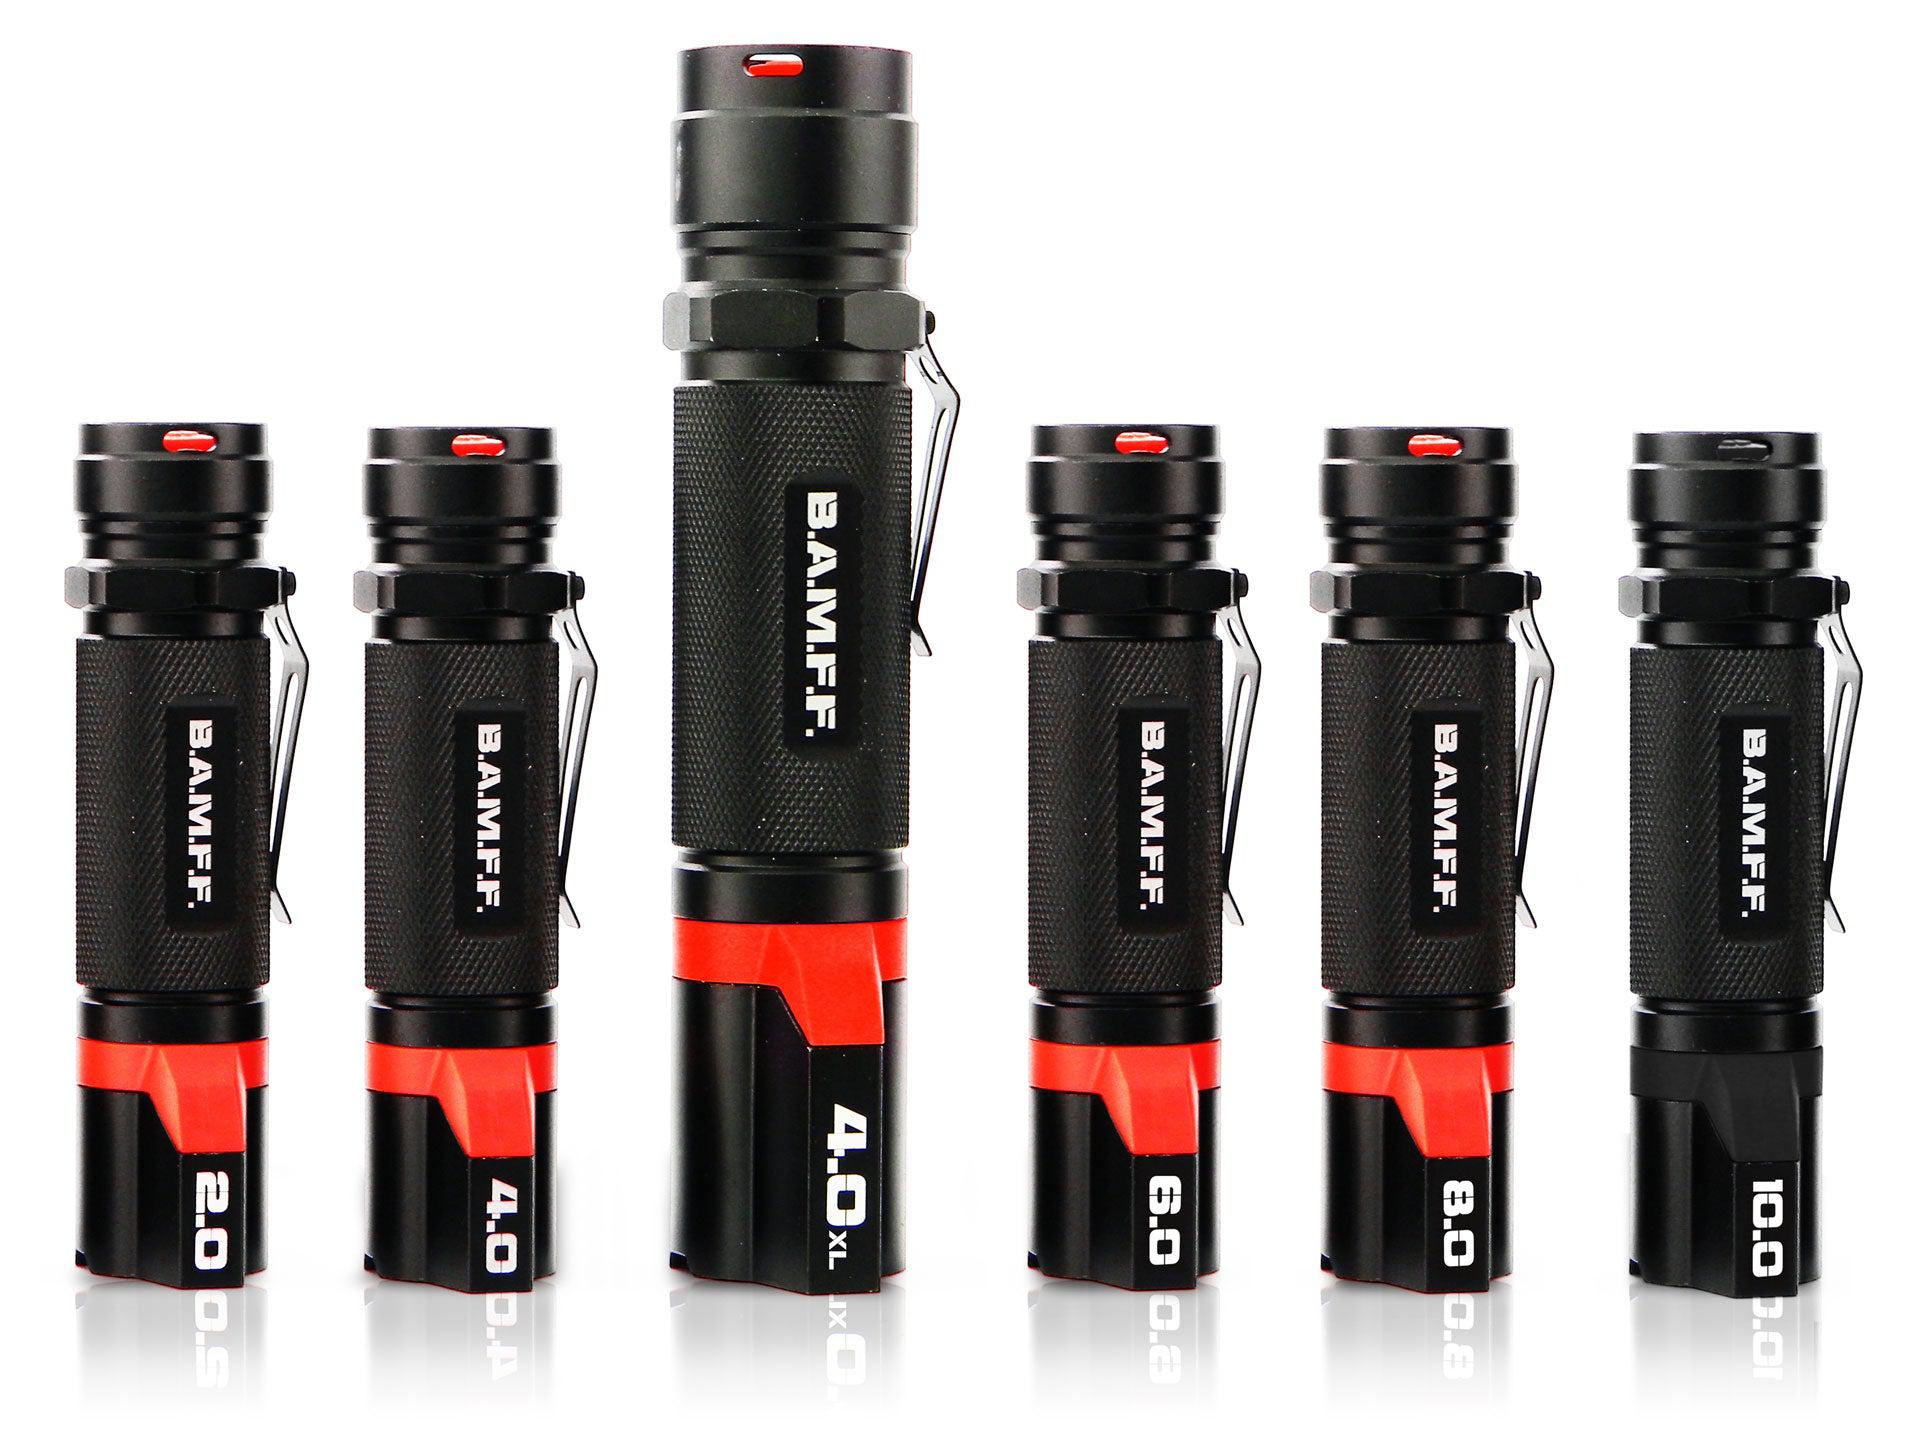 The BAMFF family of tactical flashlights all lined up in a row neatly. 6 flashlights total. The 2.0, 4.0, 6.0, 8.0, and 10.0 are all the same height. The 4.0XL is taller than the rest by 2 and a half inches.